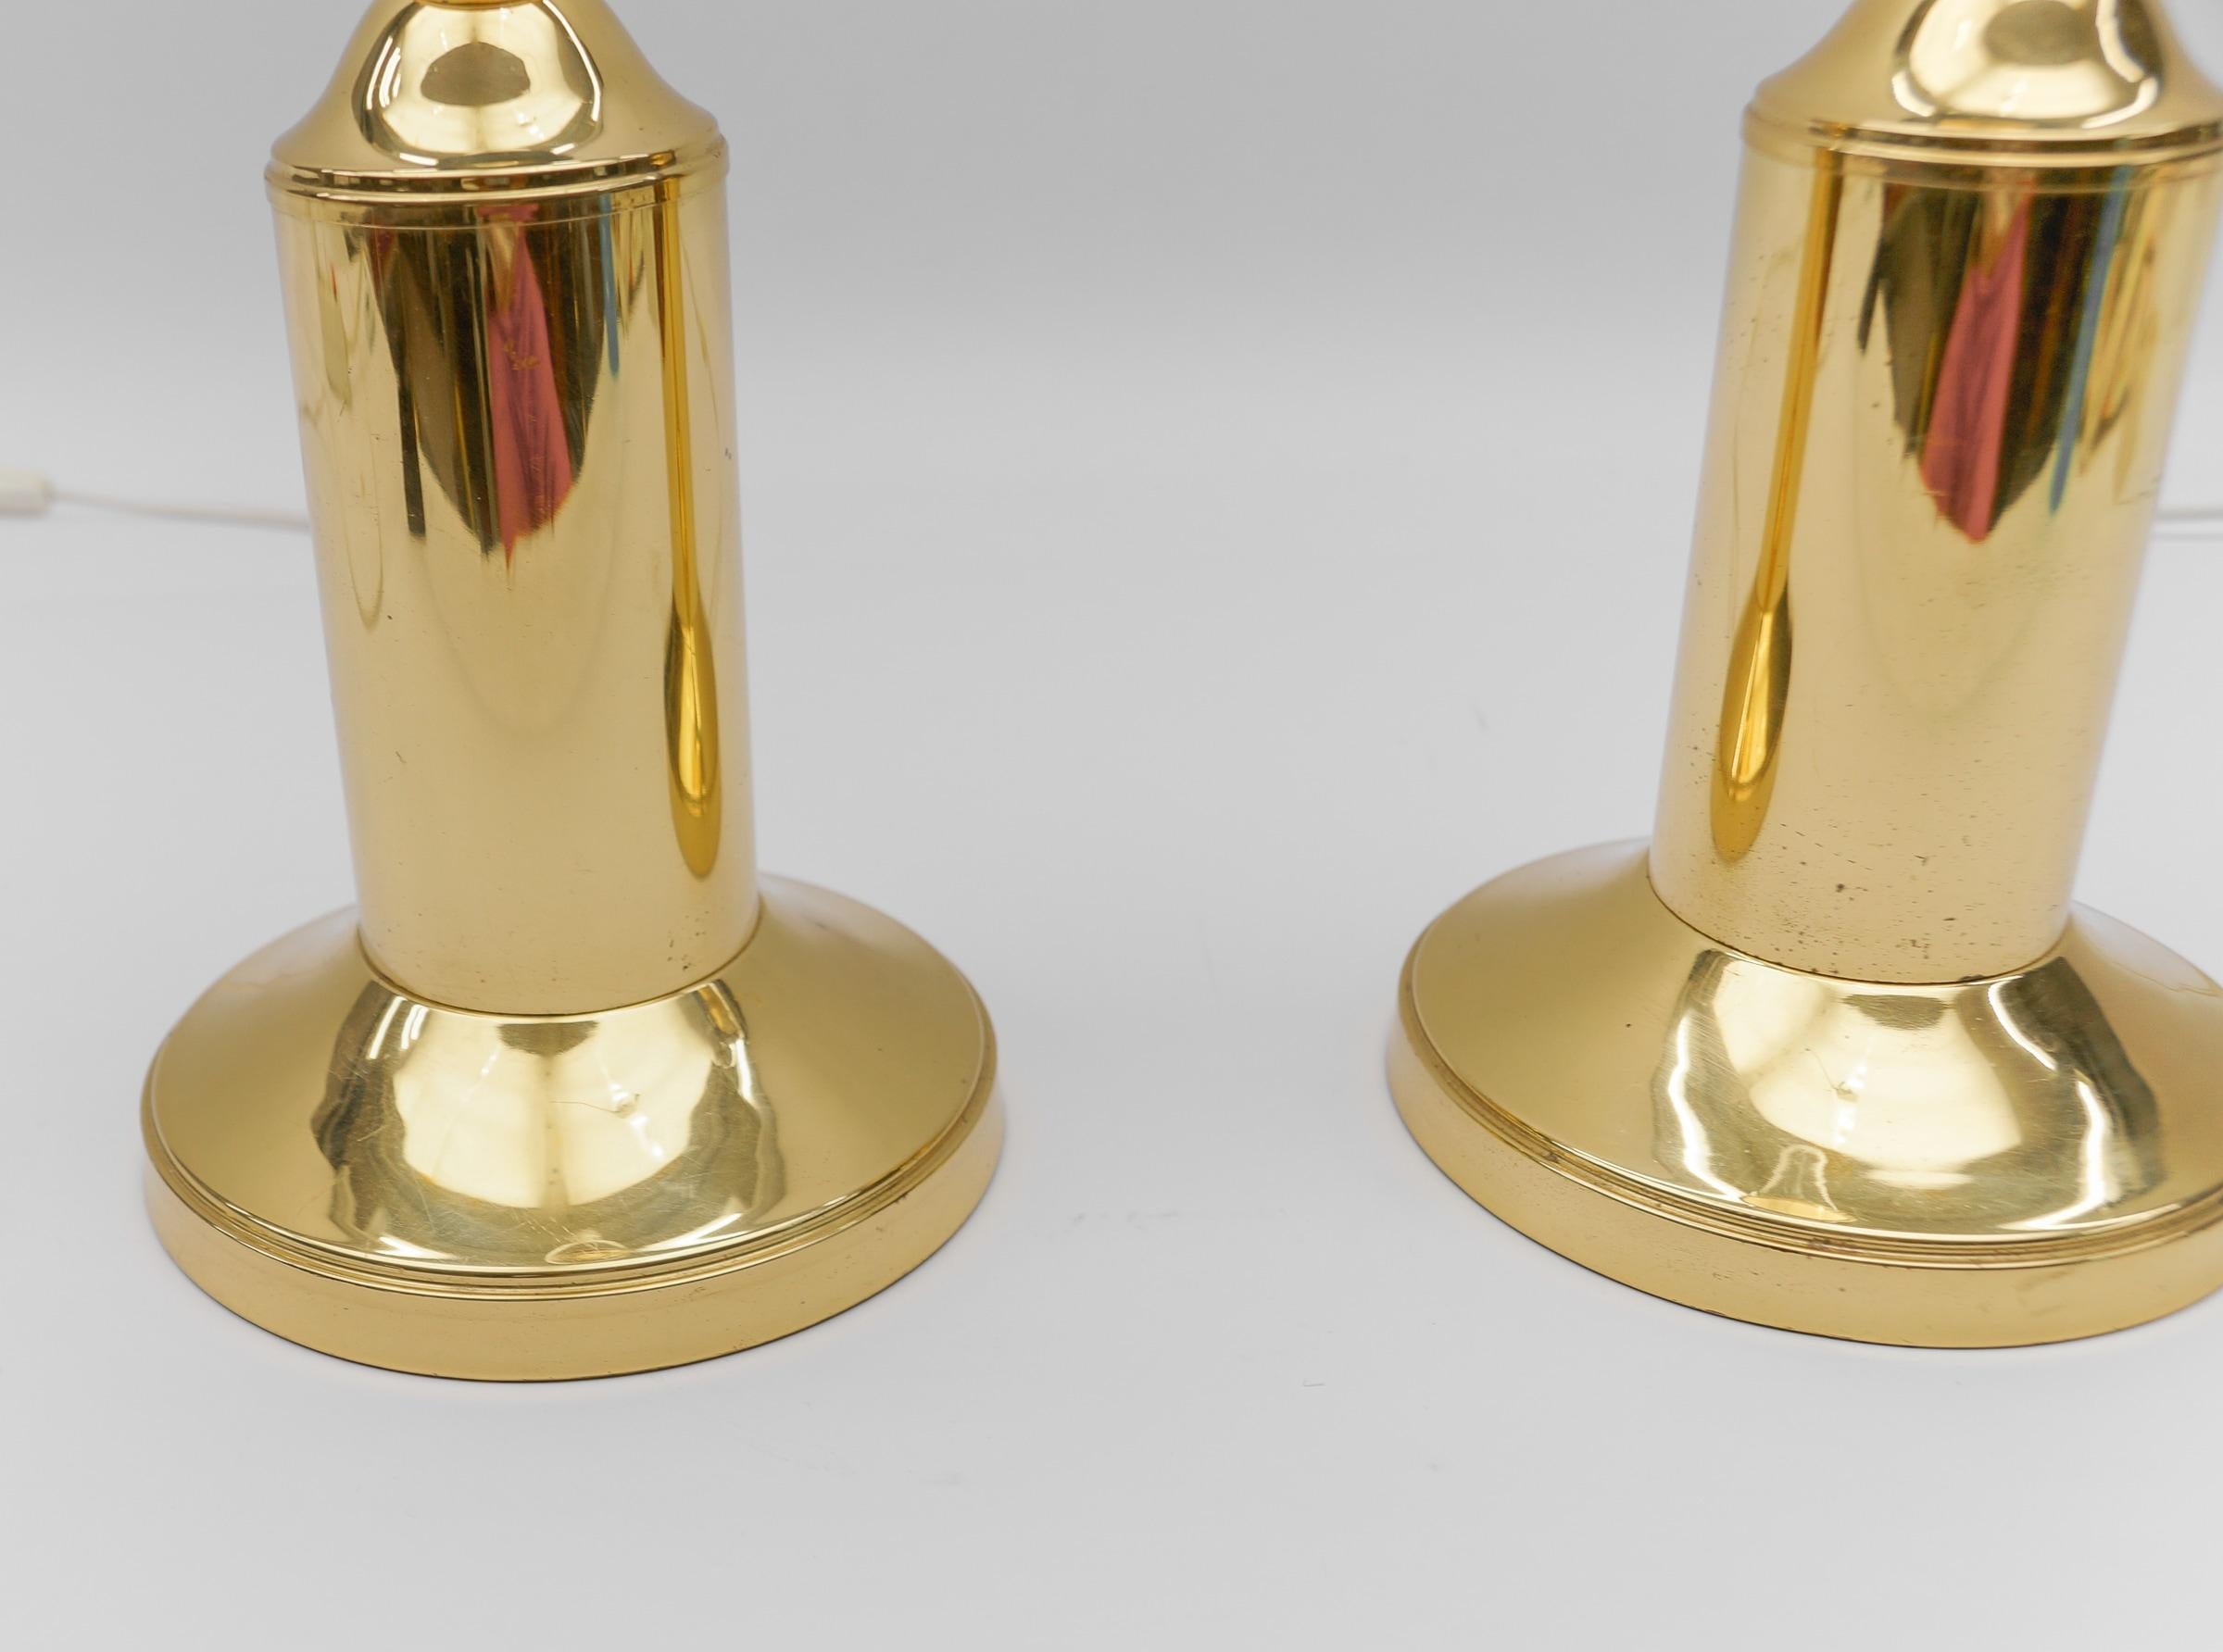 Pair of Mid Century Modern Brass Table Lamp Bases, 1960s For Sale 2